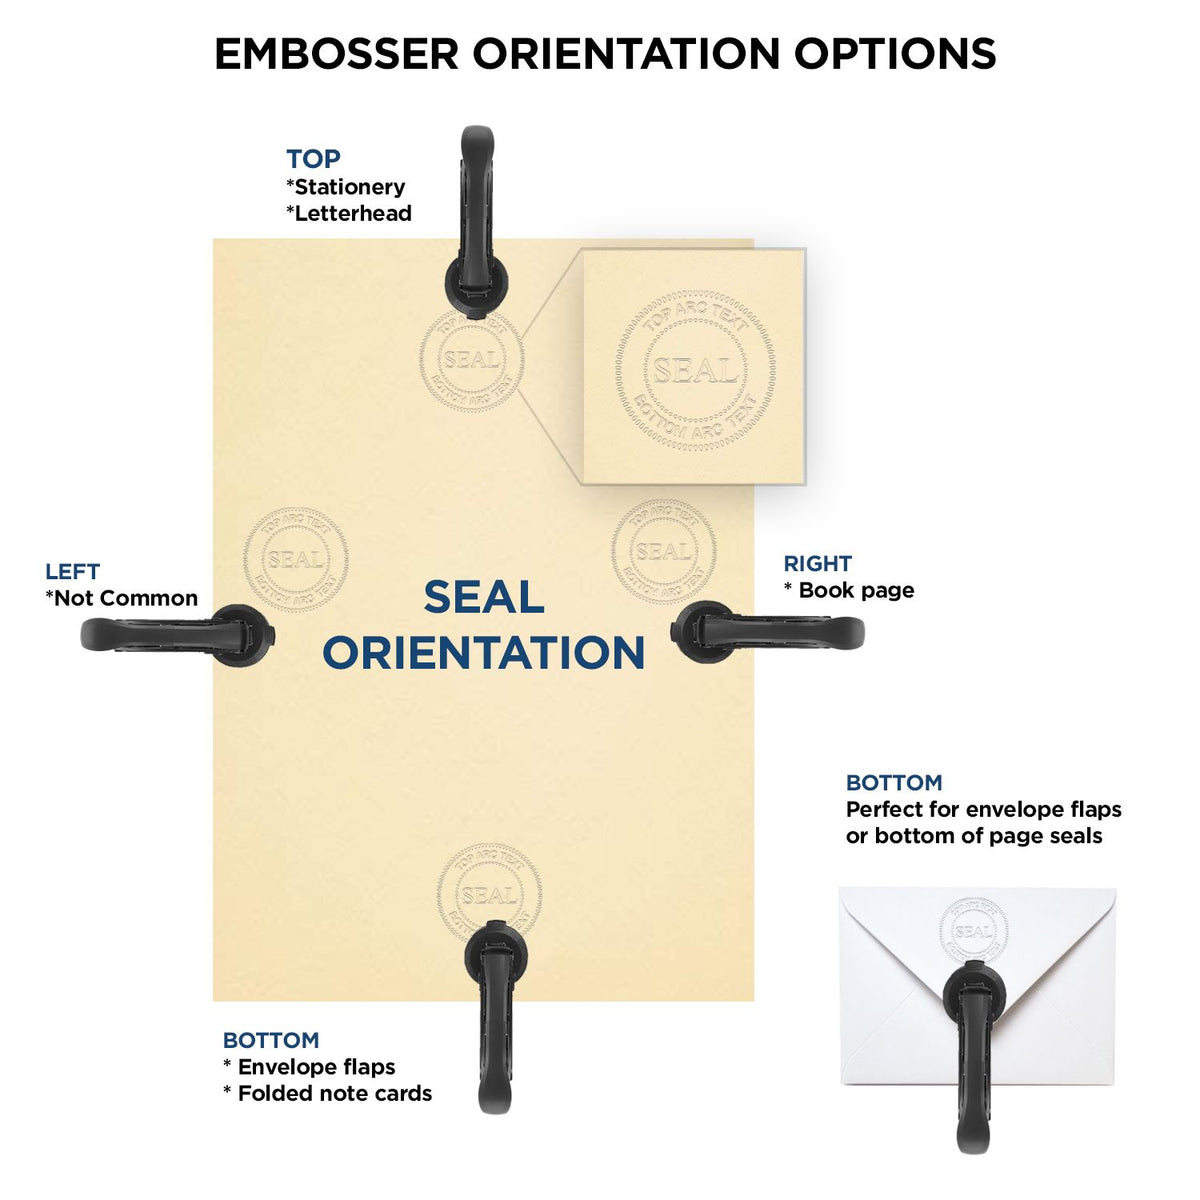 An infographic for the Heavy Duty Cast Iron South Dakota Architect Embosser showing embosser orientation, this is showing examples of a top, bottom, right and left insert.